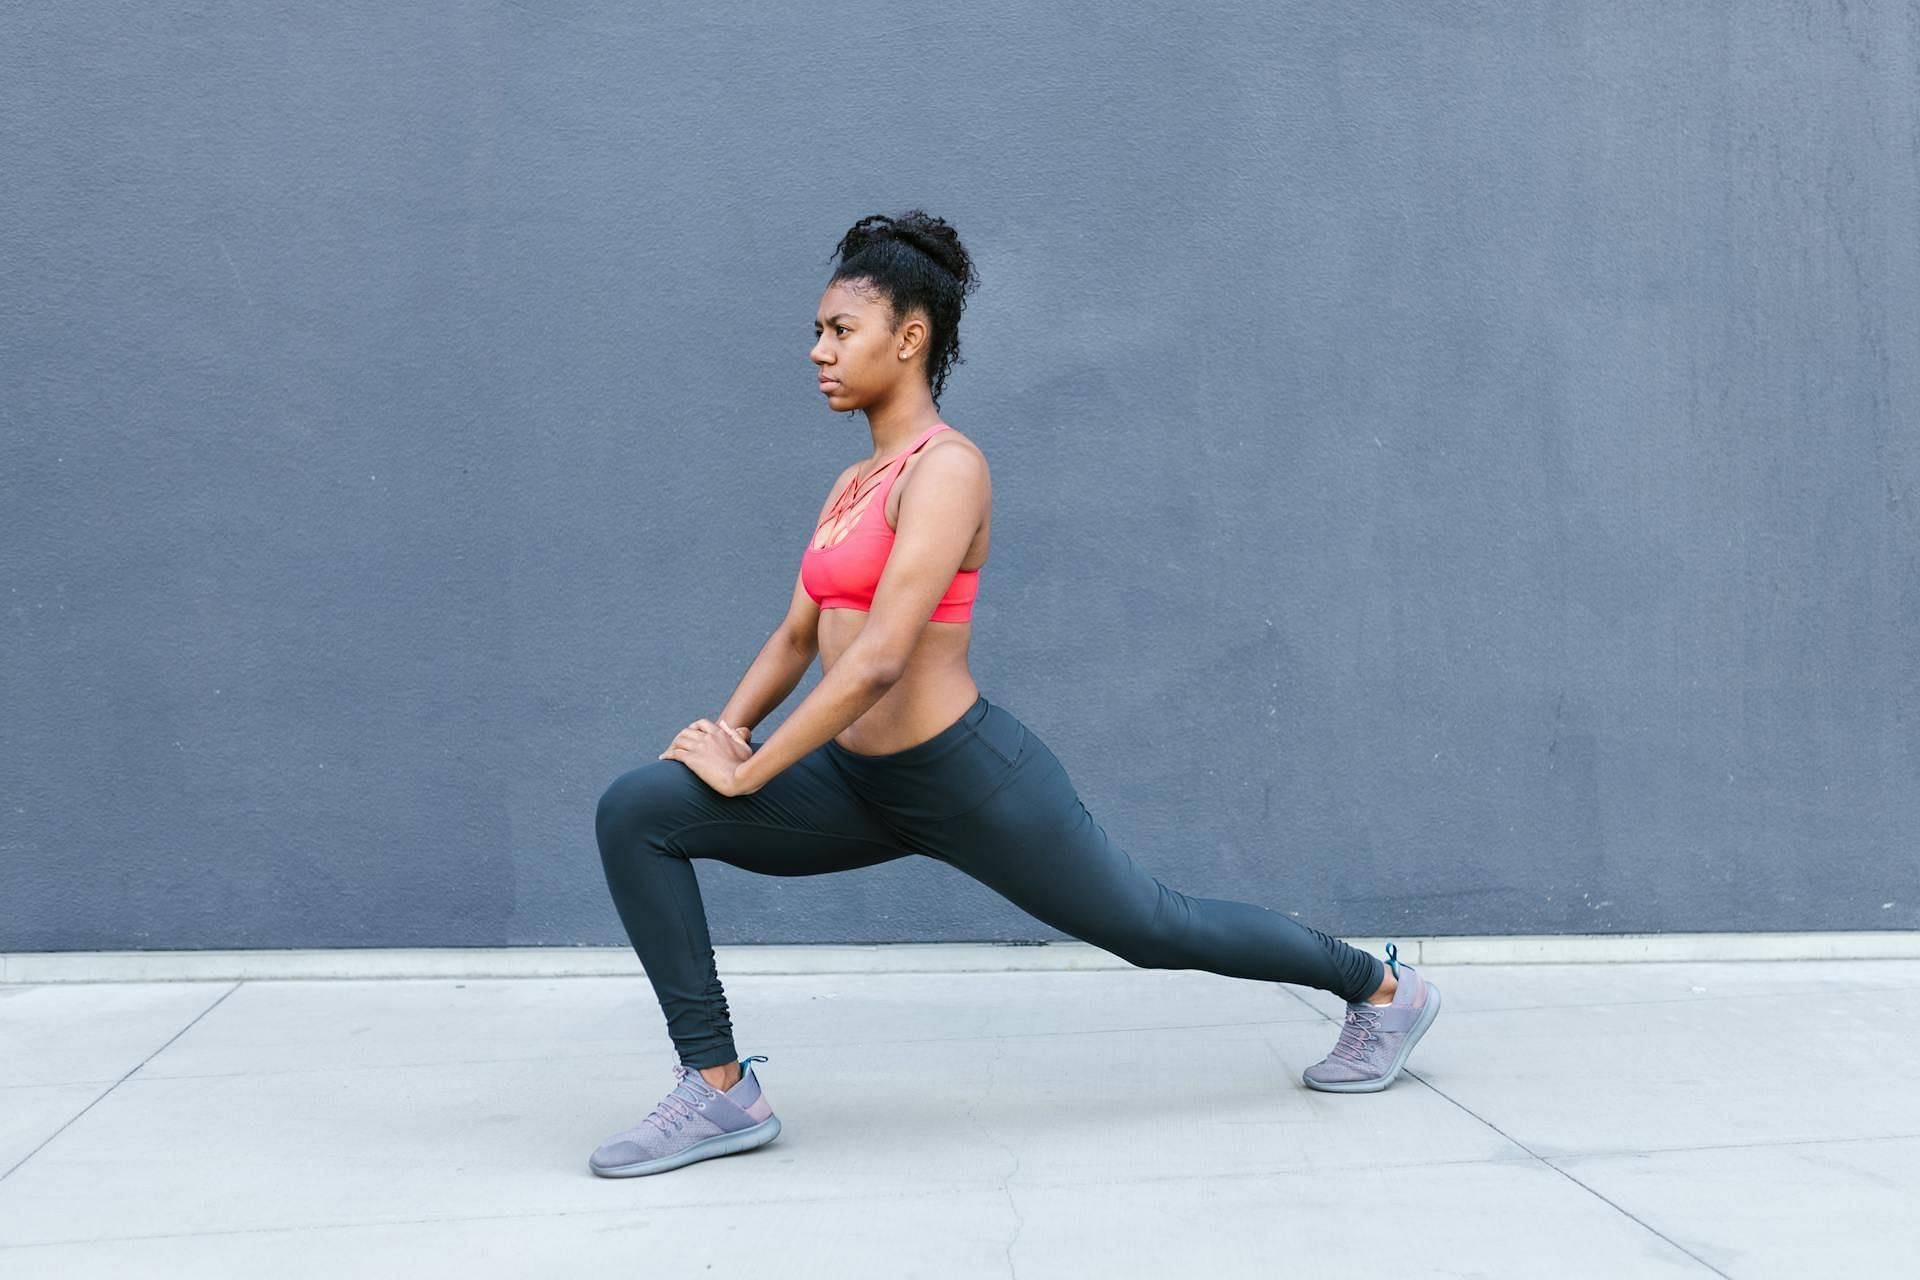 Walking lunges. (Image credits: Pexels/ Rdne Stock Project)